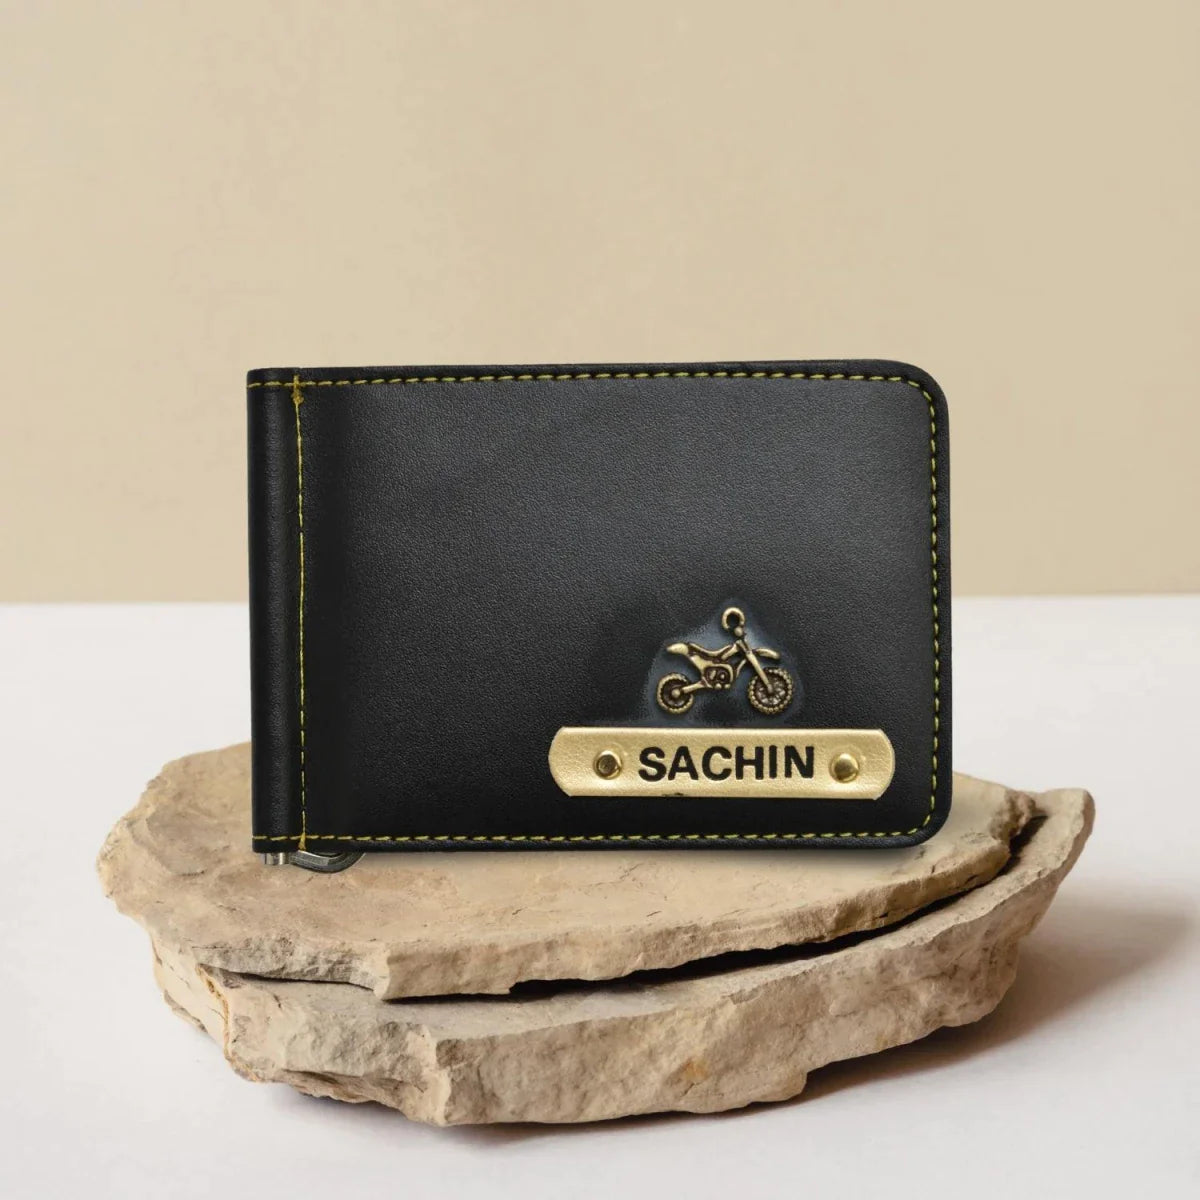 Keep your cash secure and organized with our personalized vegan leather money clip, perfect for those on the go.